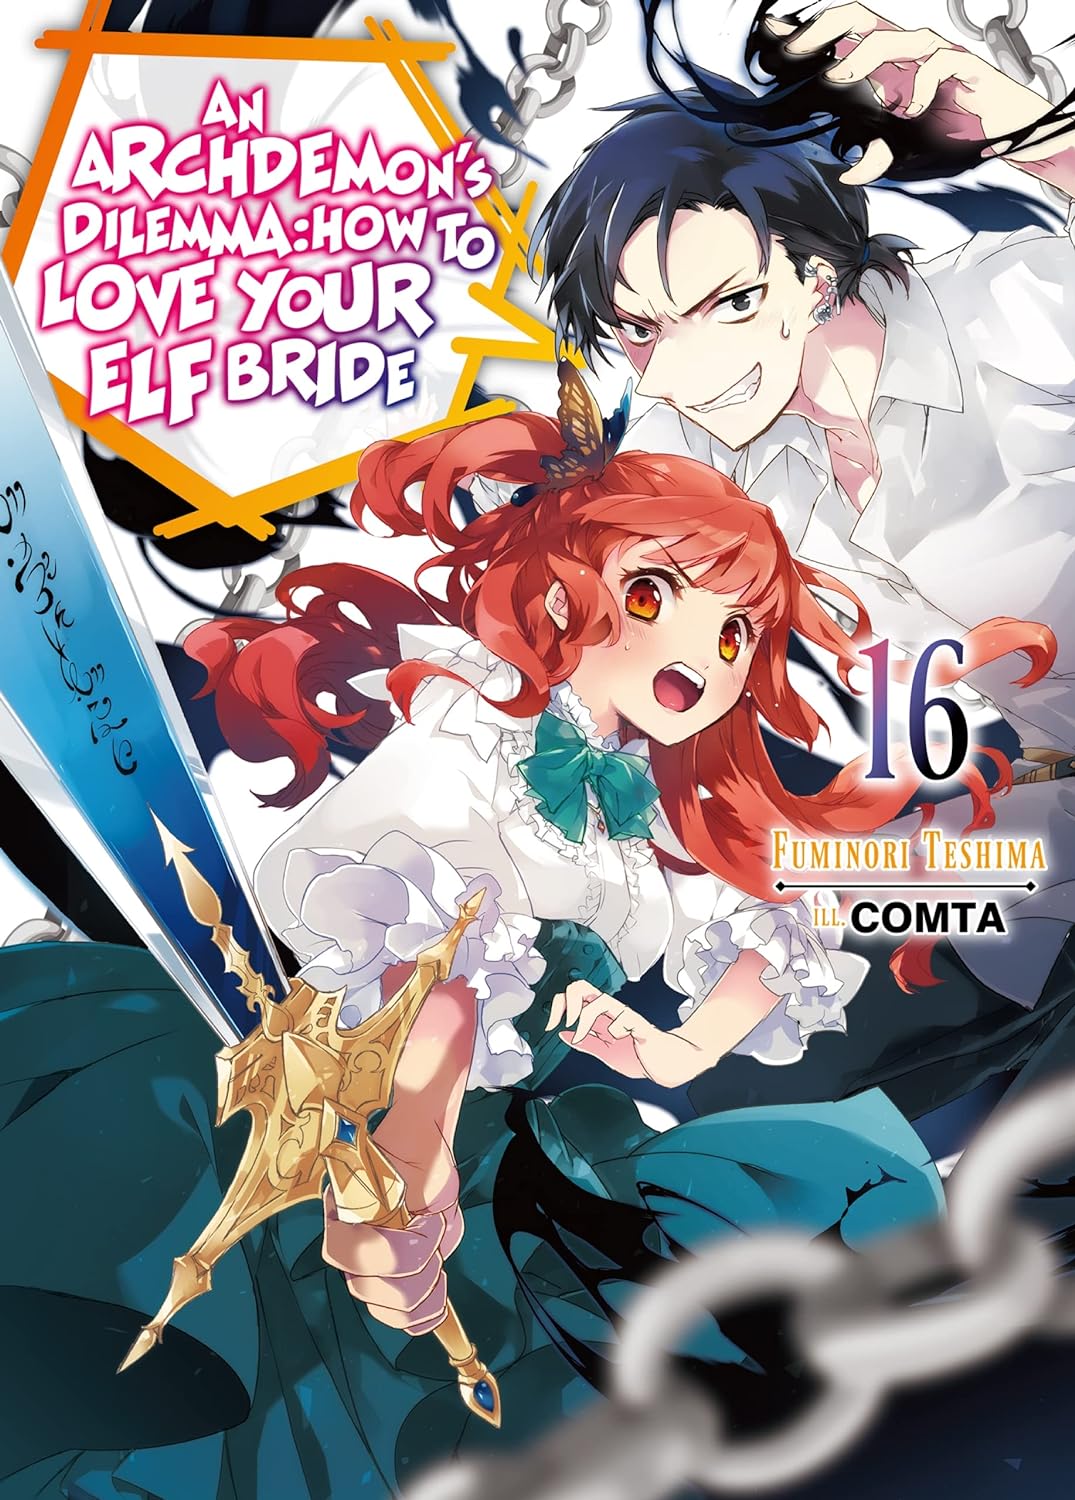 An Archdemon's Dilemma: How to Love Your Elf Bride: Volume 16